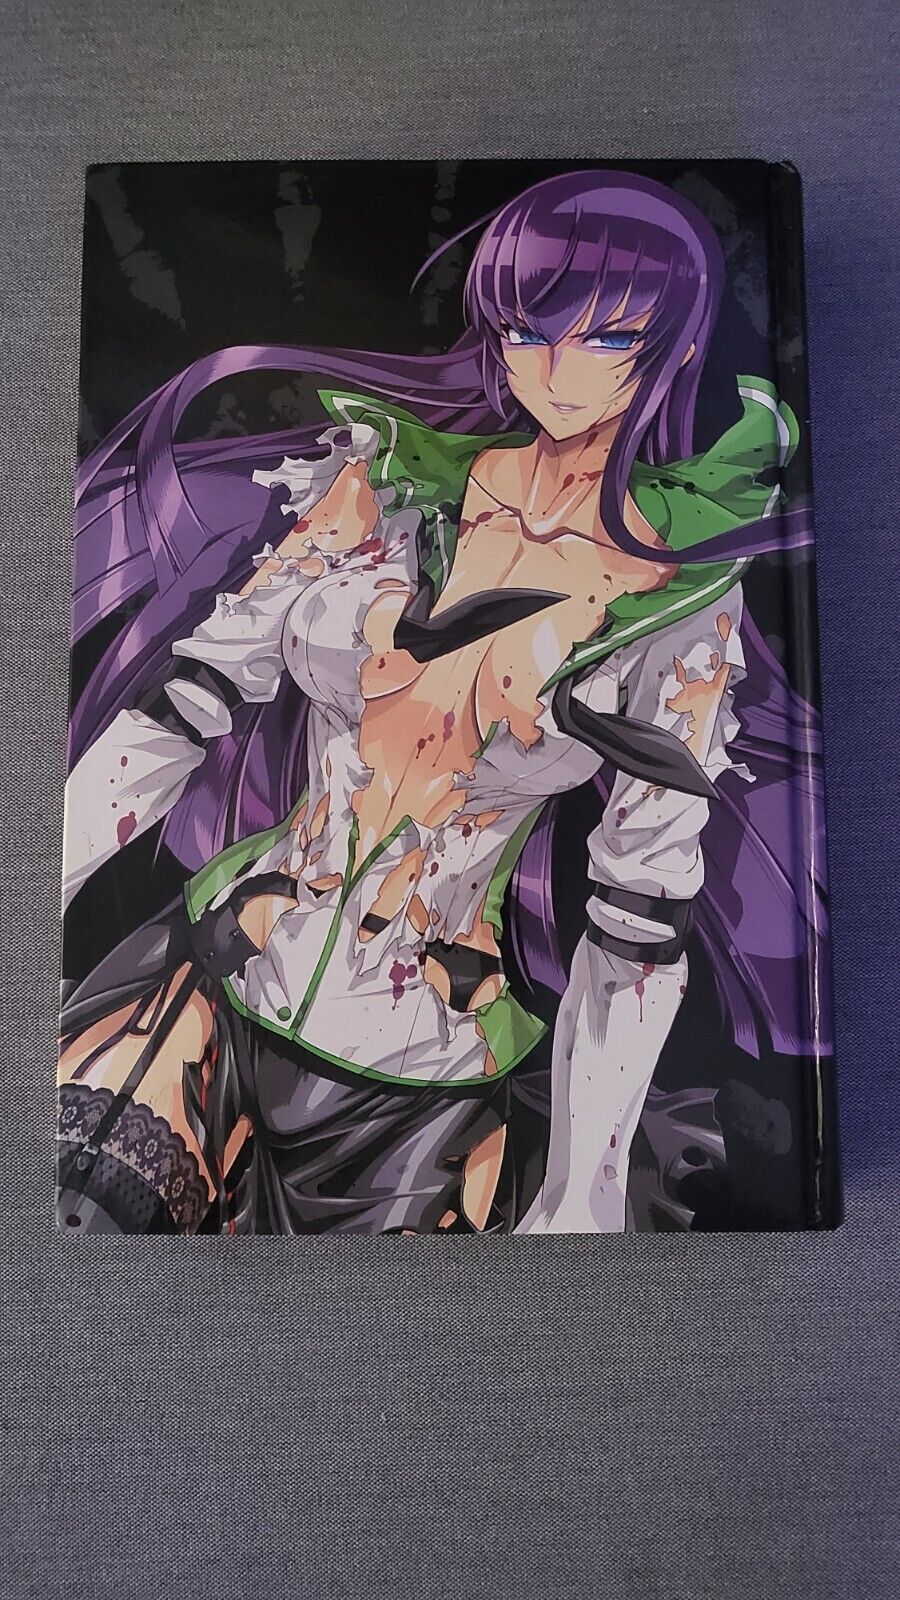 Highschool of the Dead full color Volume 2 (Hardcover) No Slip Cover